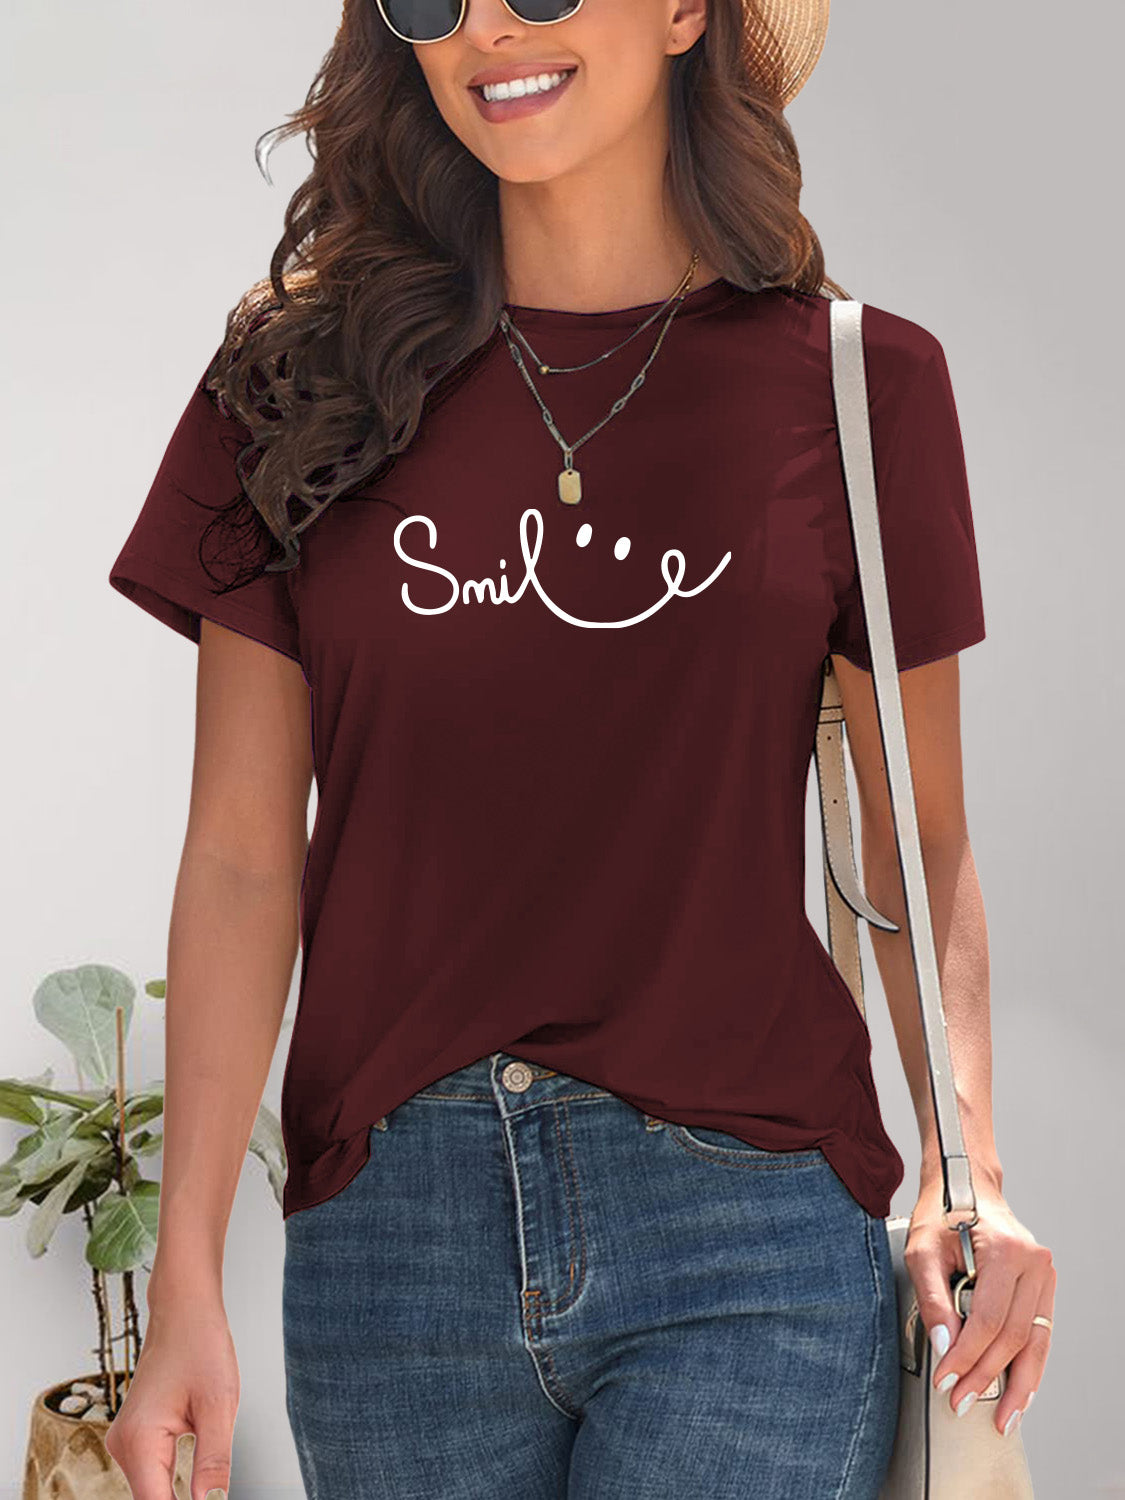 Cheerful woman in a white graphic t-shirt with a 'smile' design, embodying a relaxed and happy vibe.